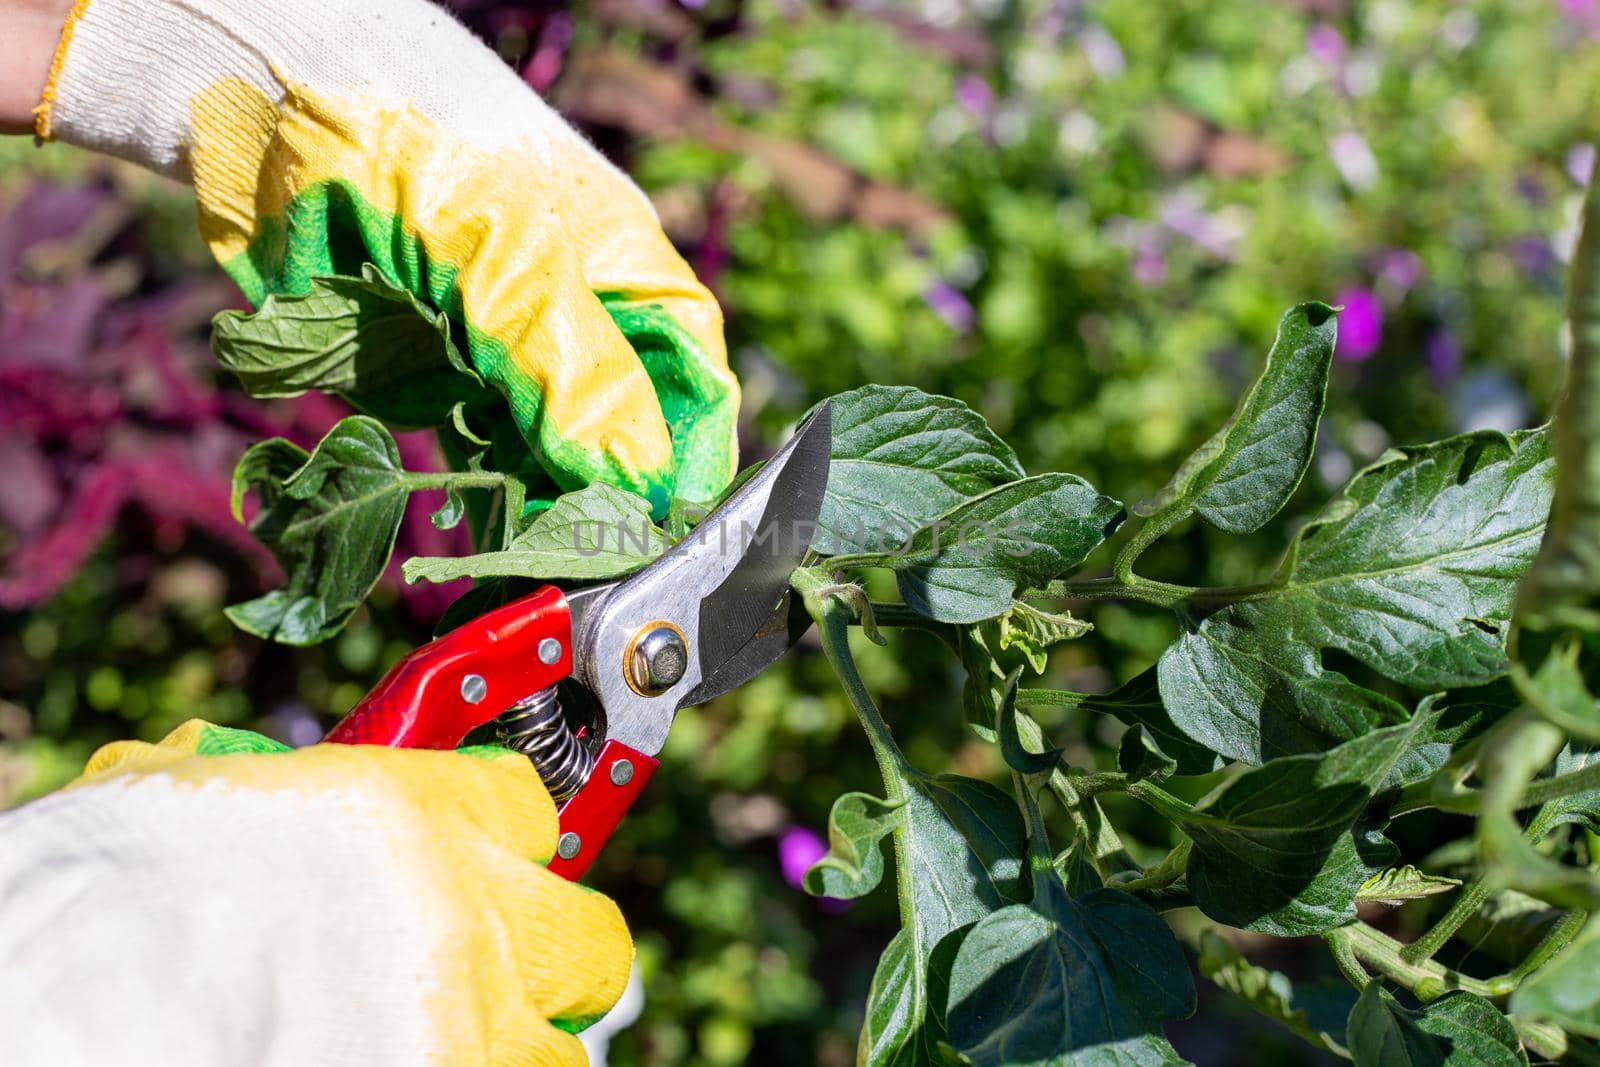 Pruning tomato bushes with pruning shears. Growing and caring for garden vegetables.